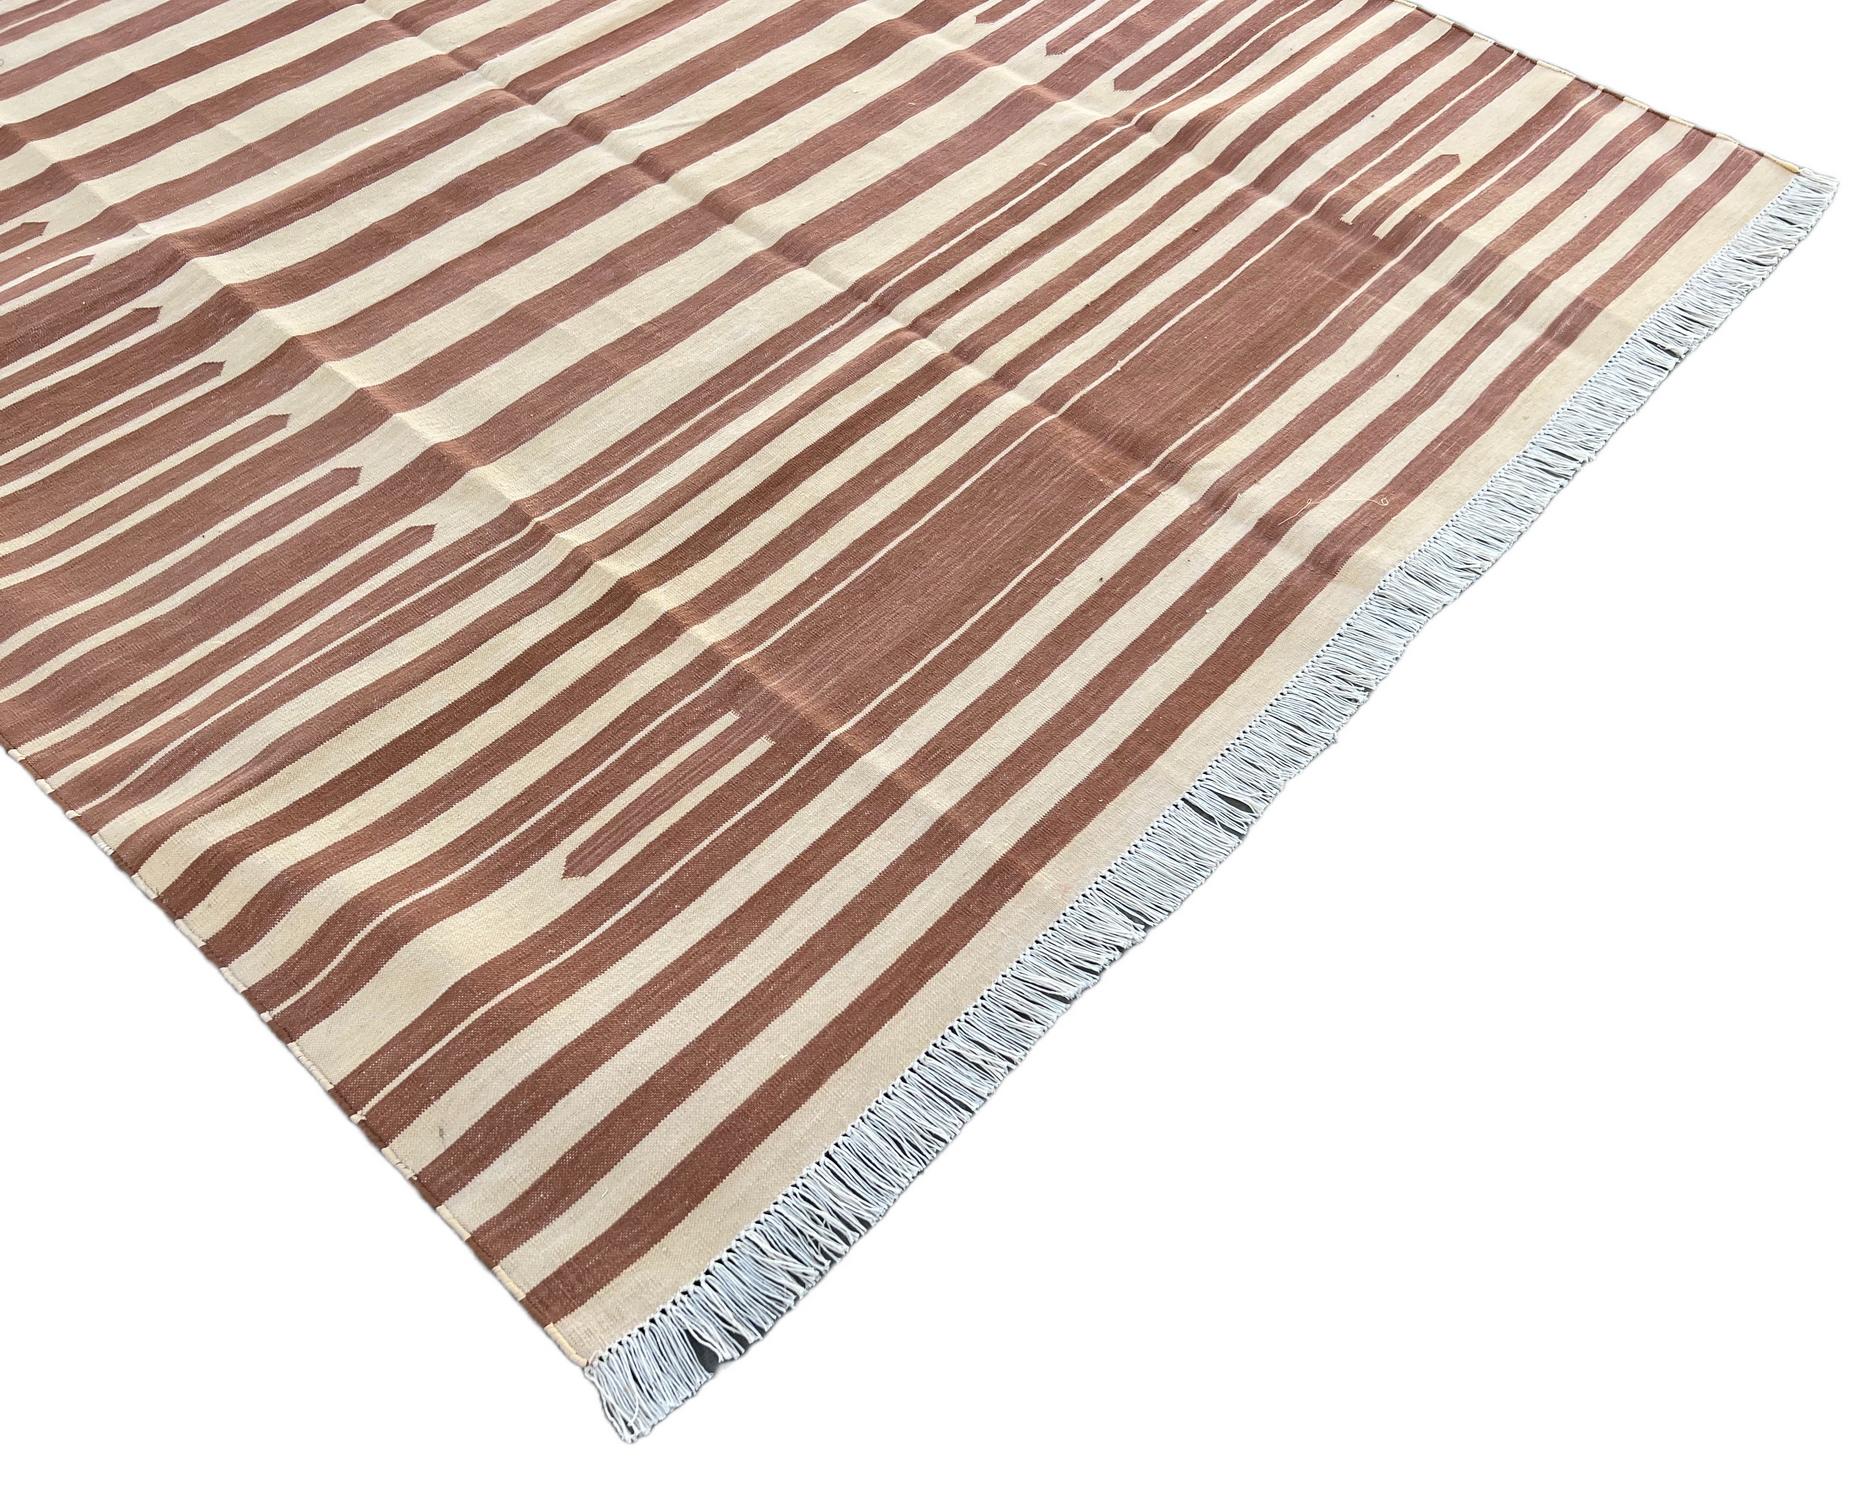 Hand-Woven Handmade Cotton Area Flat Weave Rug, 5x7 Tan And Cream Striped Indian Dhurrie For Sale